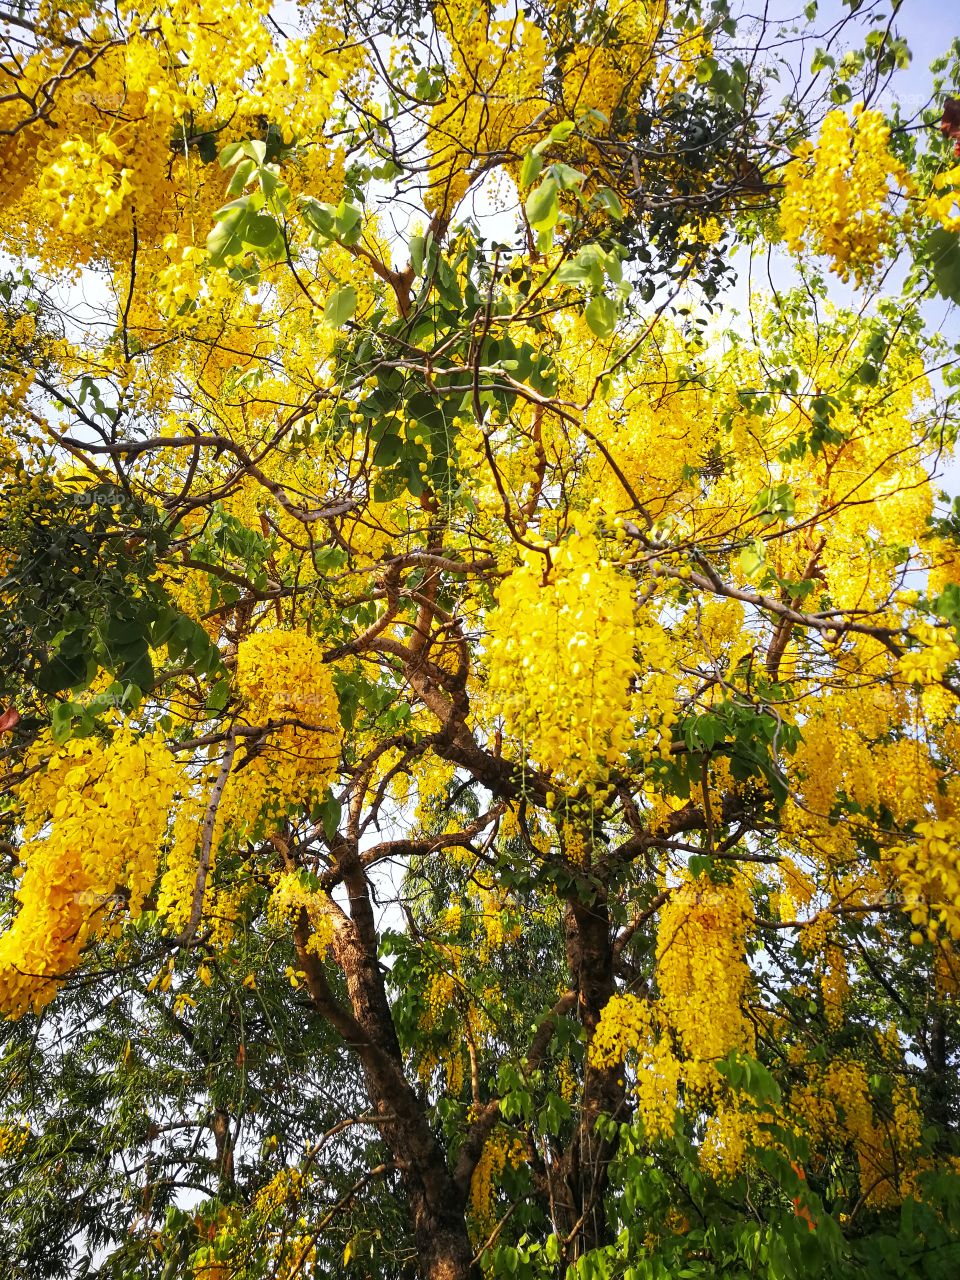 Clusters of bright yellow flowers in tropical tree